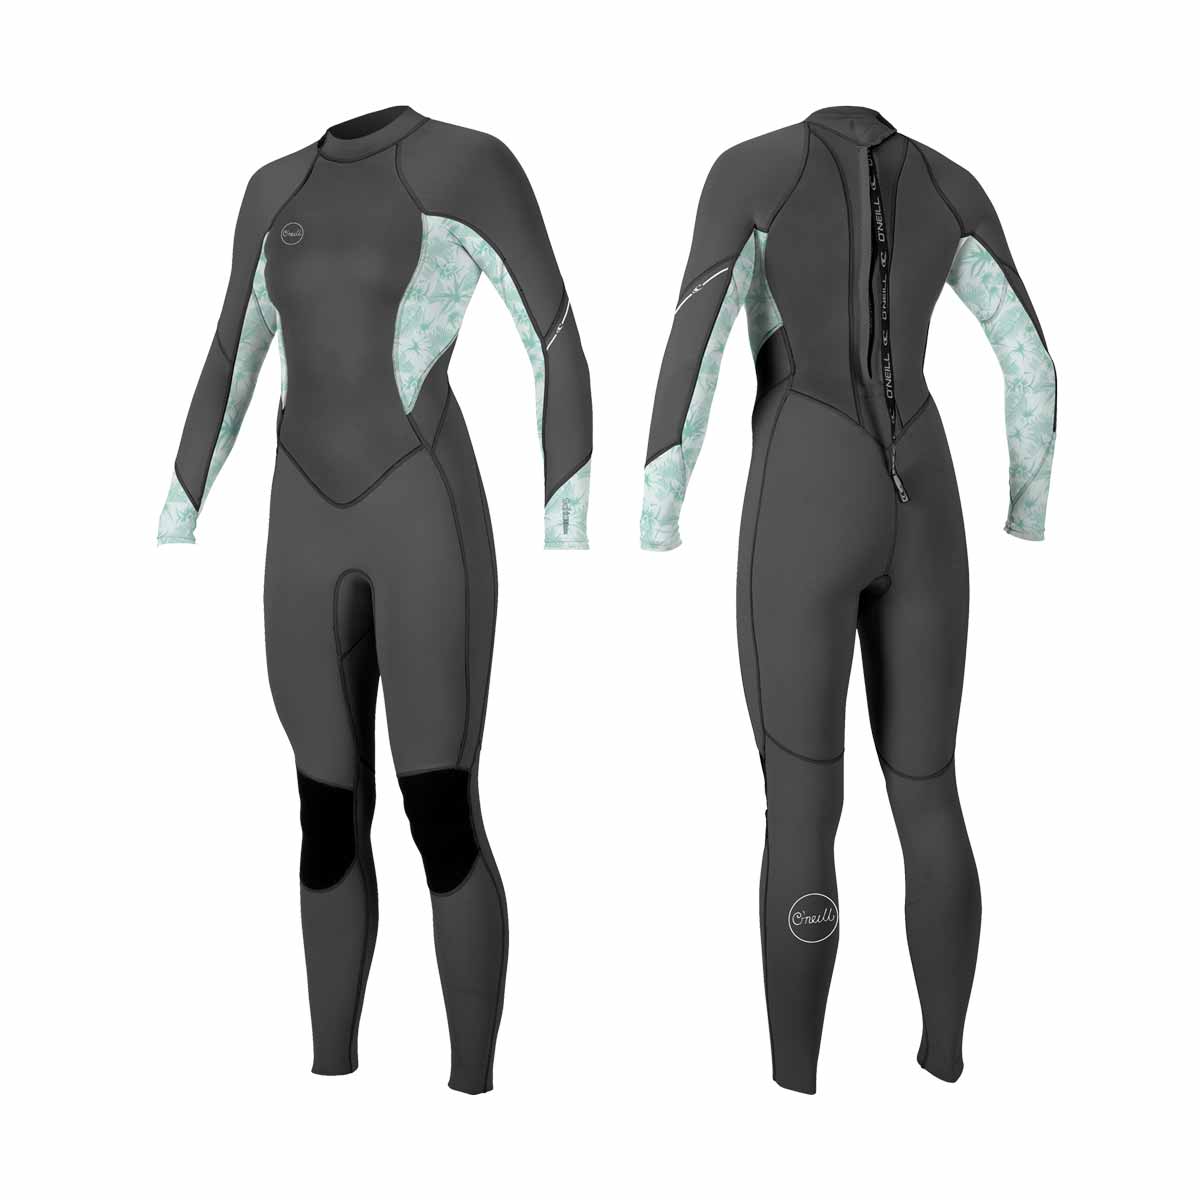 O'Neill Wms Bahia 3/2 Back Zip Full Wetsuit – Graphite/Mirage Tropical HY8